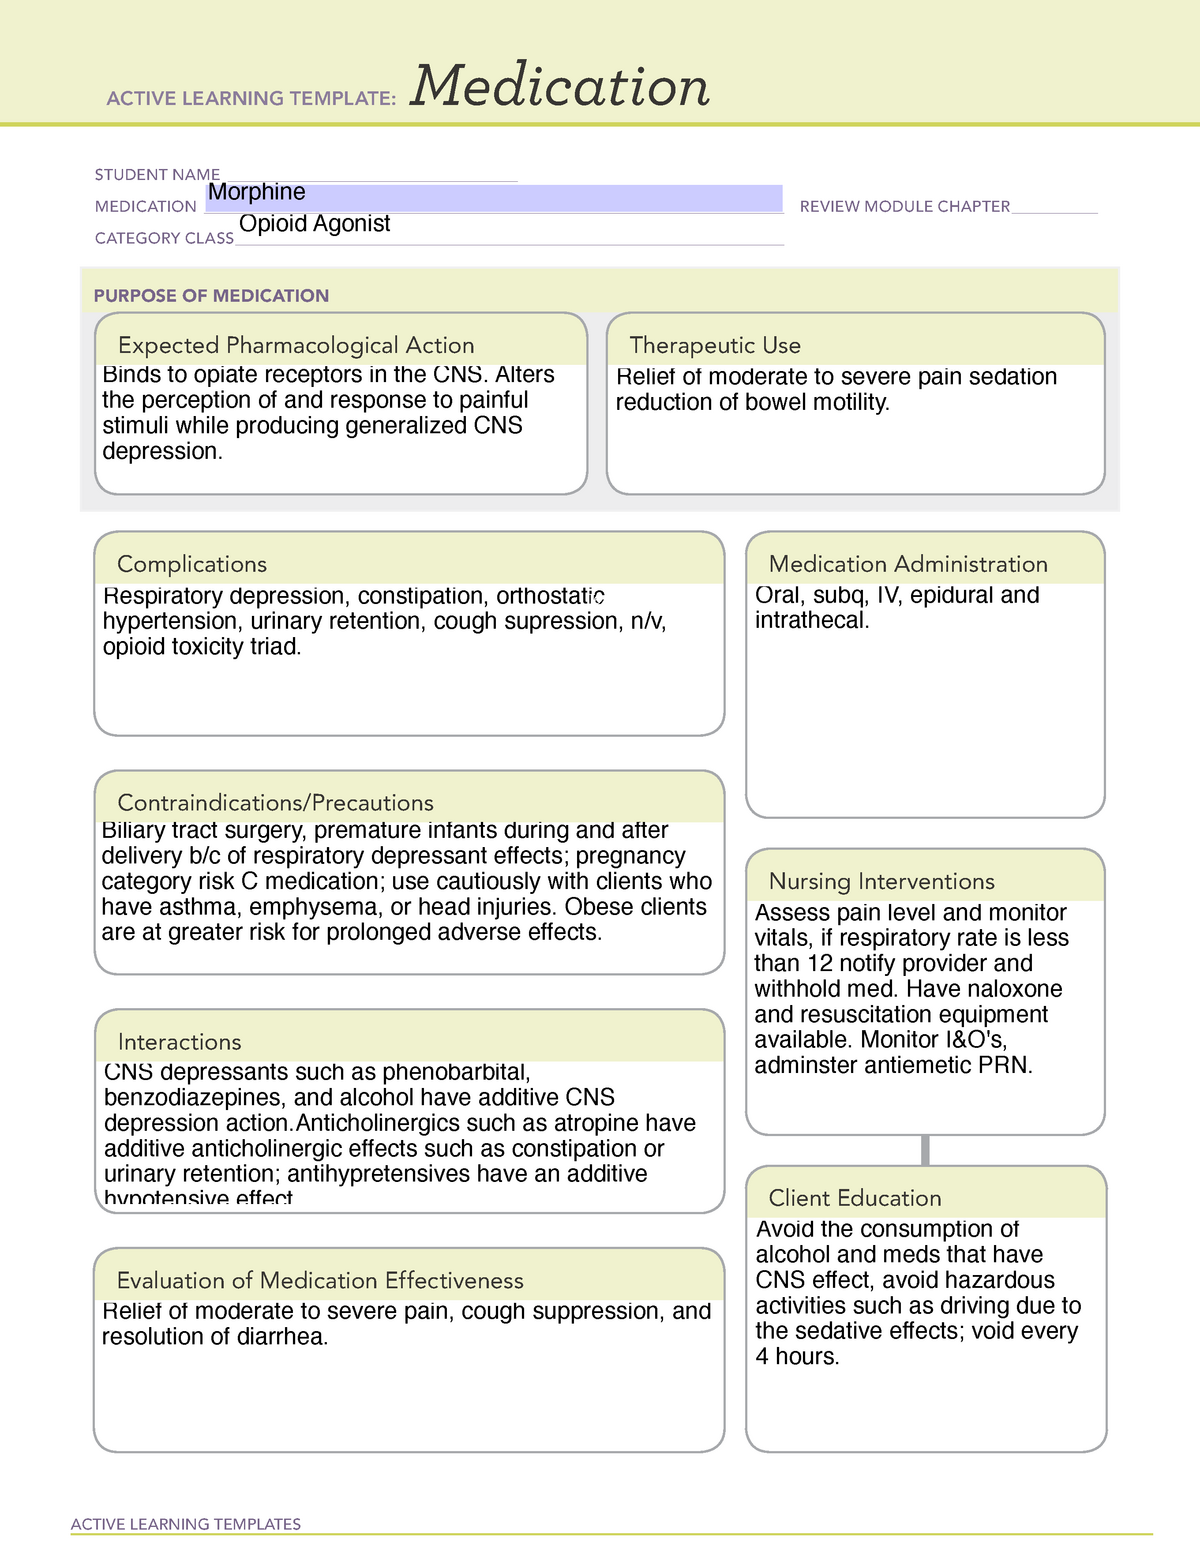 Morphine med ATI template medications. ACTIVE LEARNING TEMPLATES